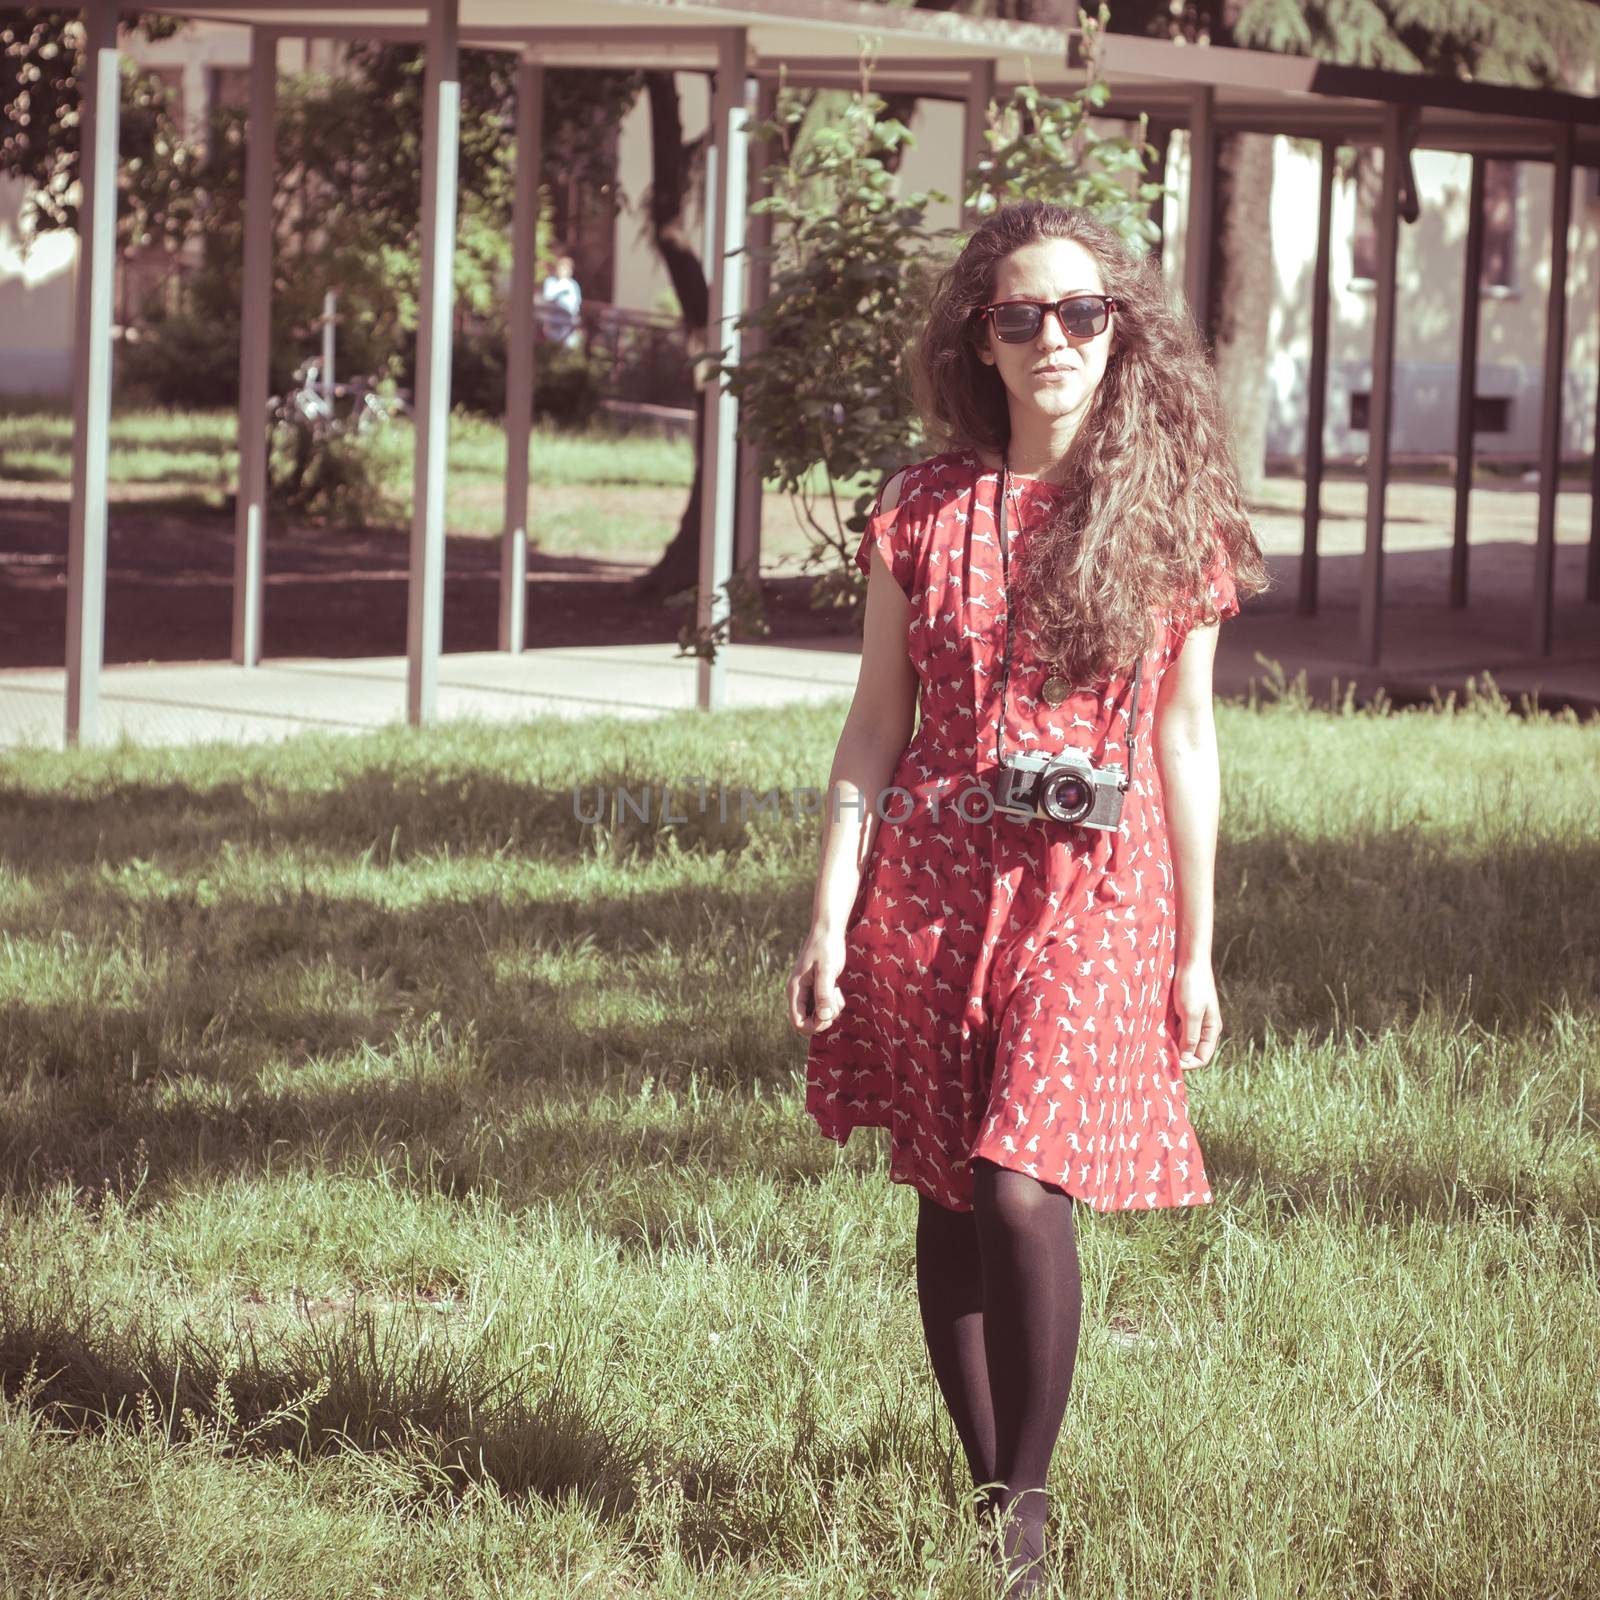 hipster vintage woman with old camera by peus